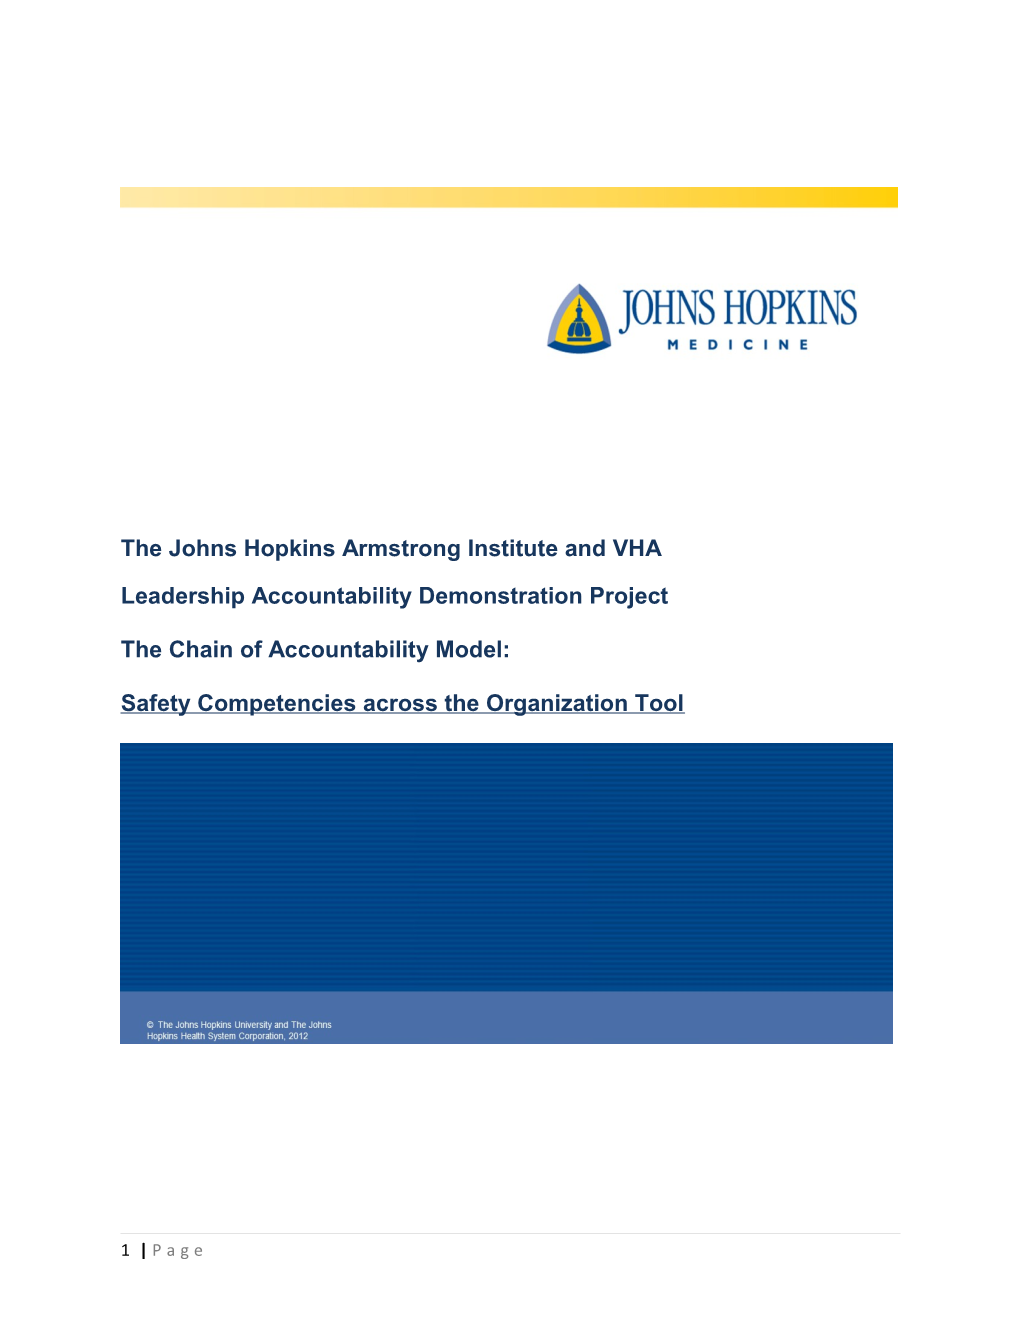 The Johns Hopkins Armstrong Institute and VHA